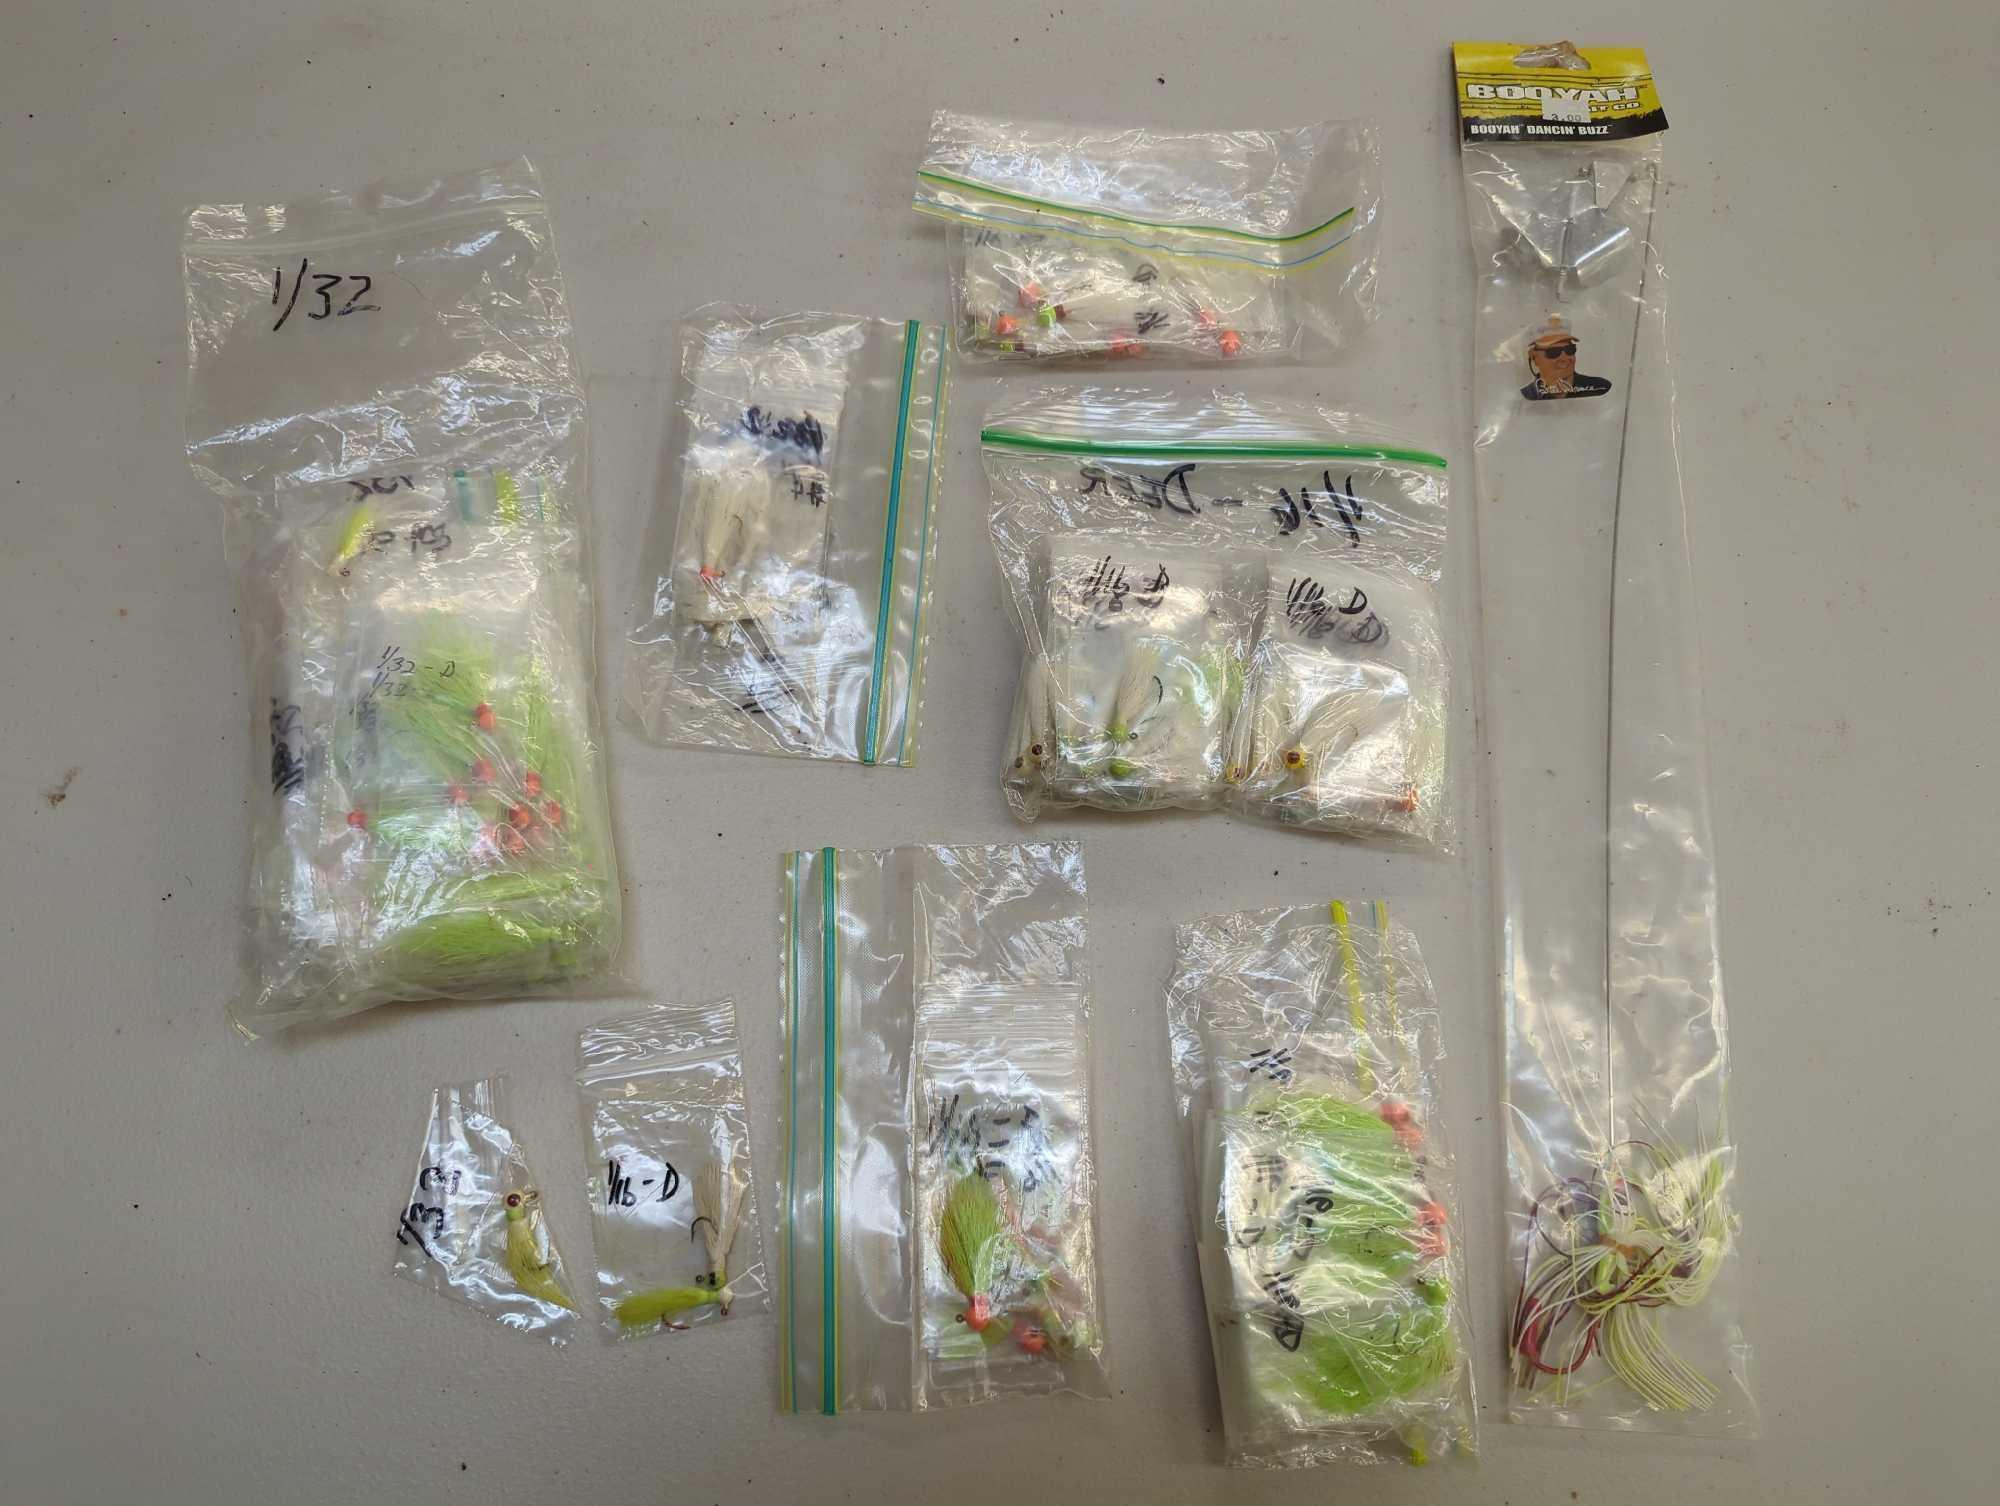 Ziploc bag of fishing lures of similar styles. Comes as is shown in photos. Appears to be new.